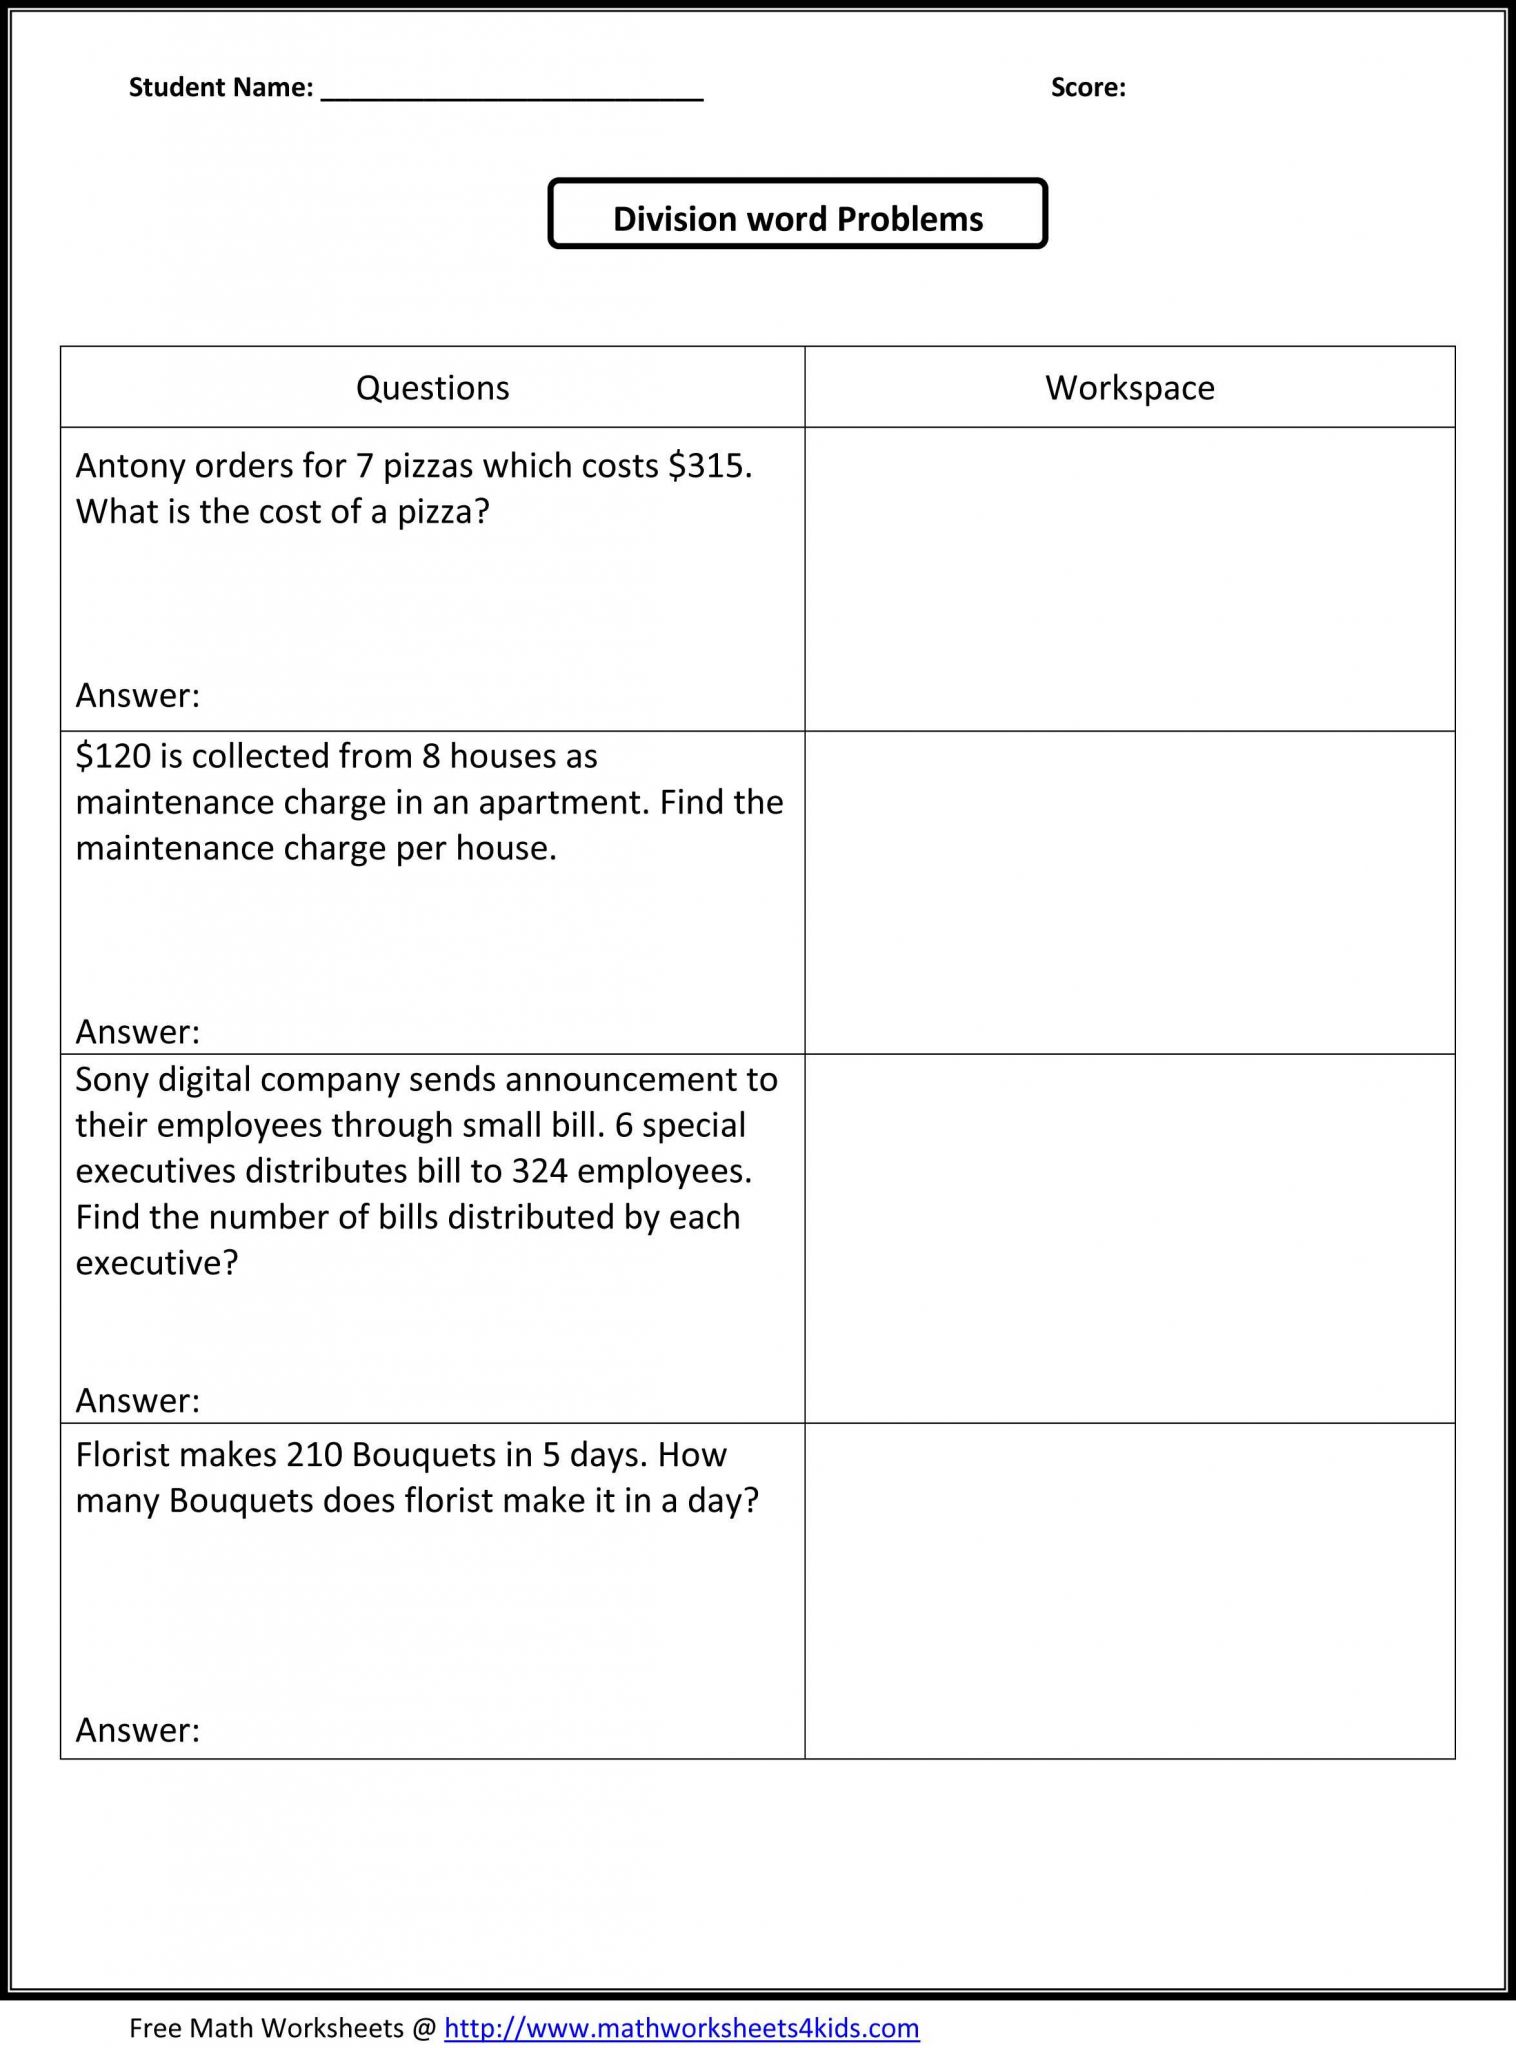 Nutrition Worksheets Pdf and 4th Grade Math Word Problems Worksheets Pdf the Best Worksheets